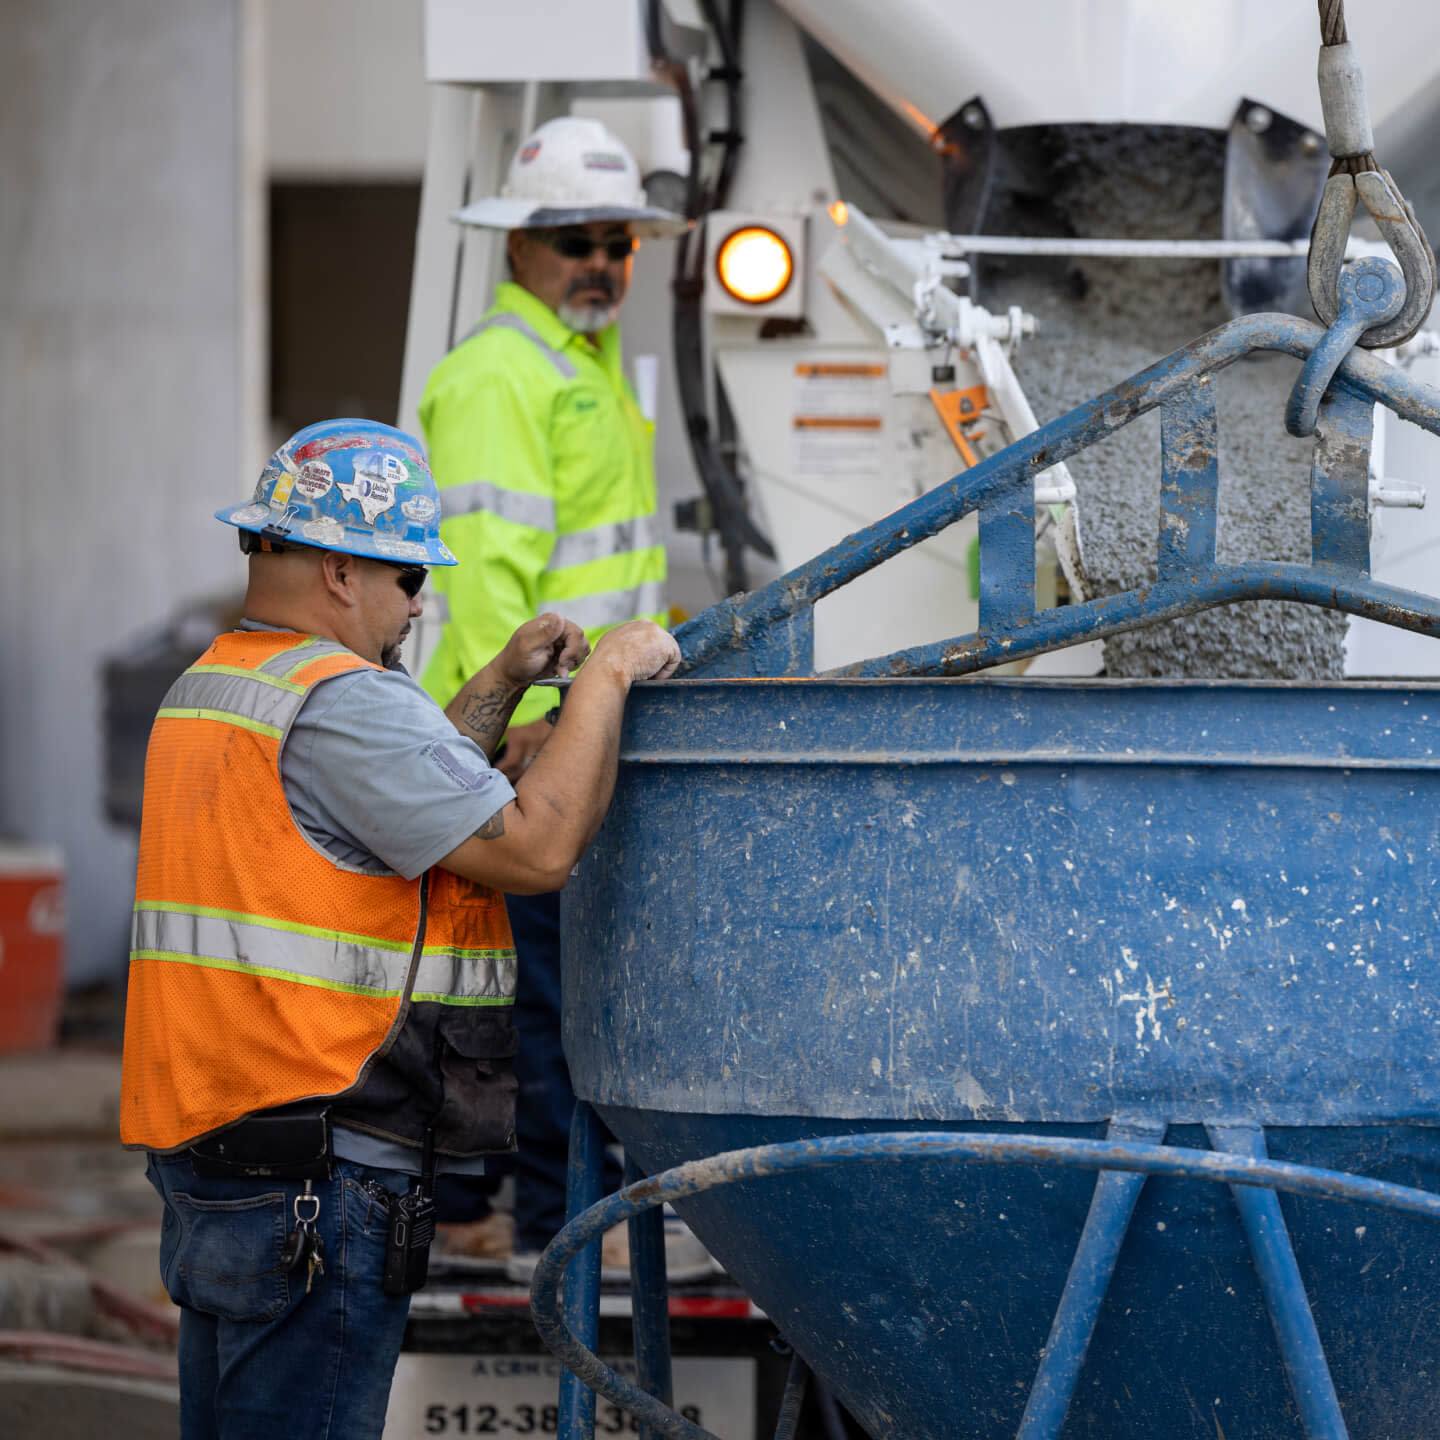 Two construction workers using a cement mixer